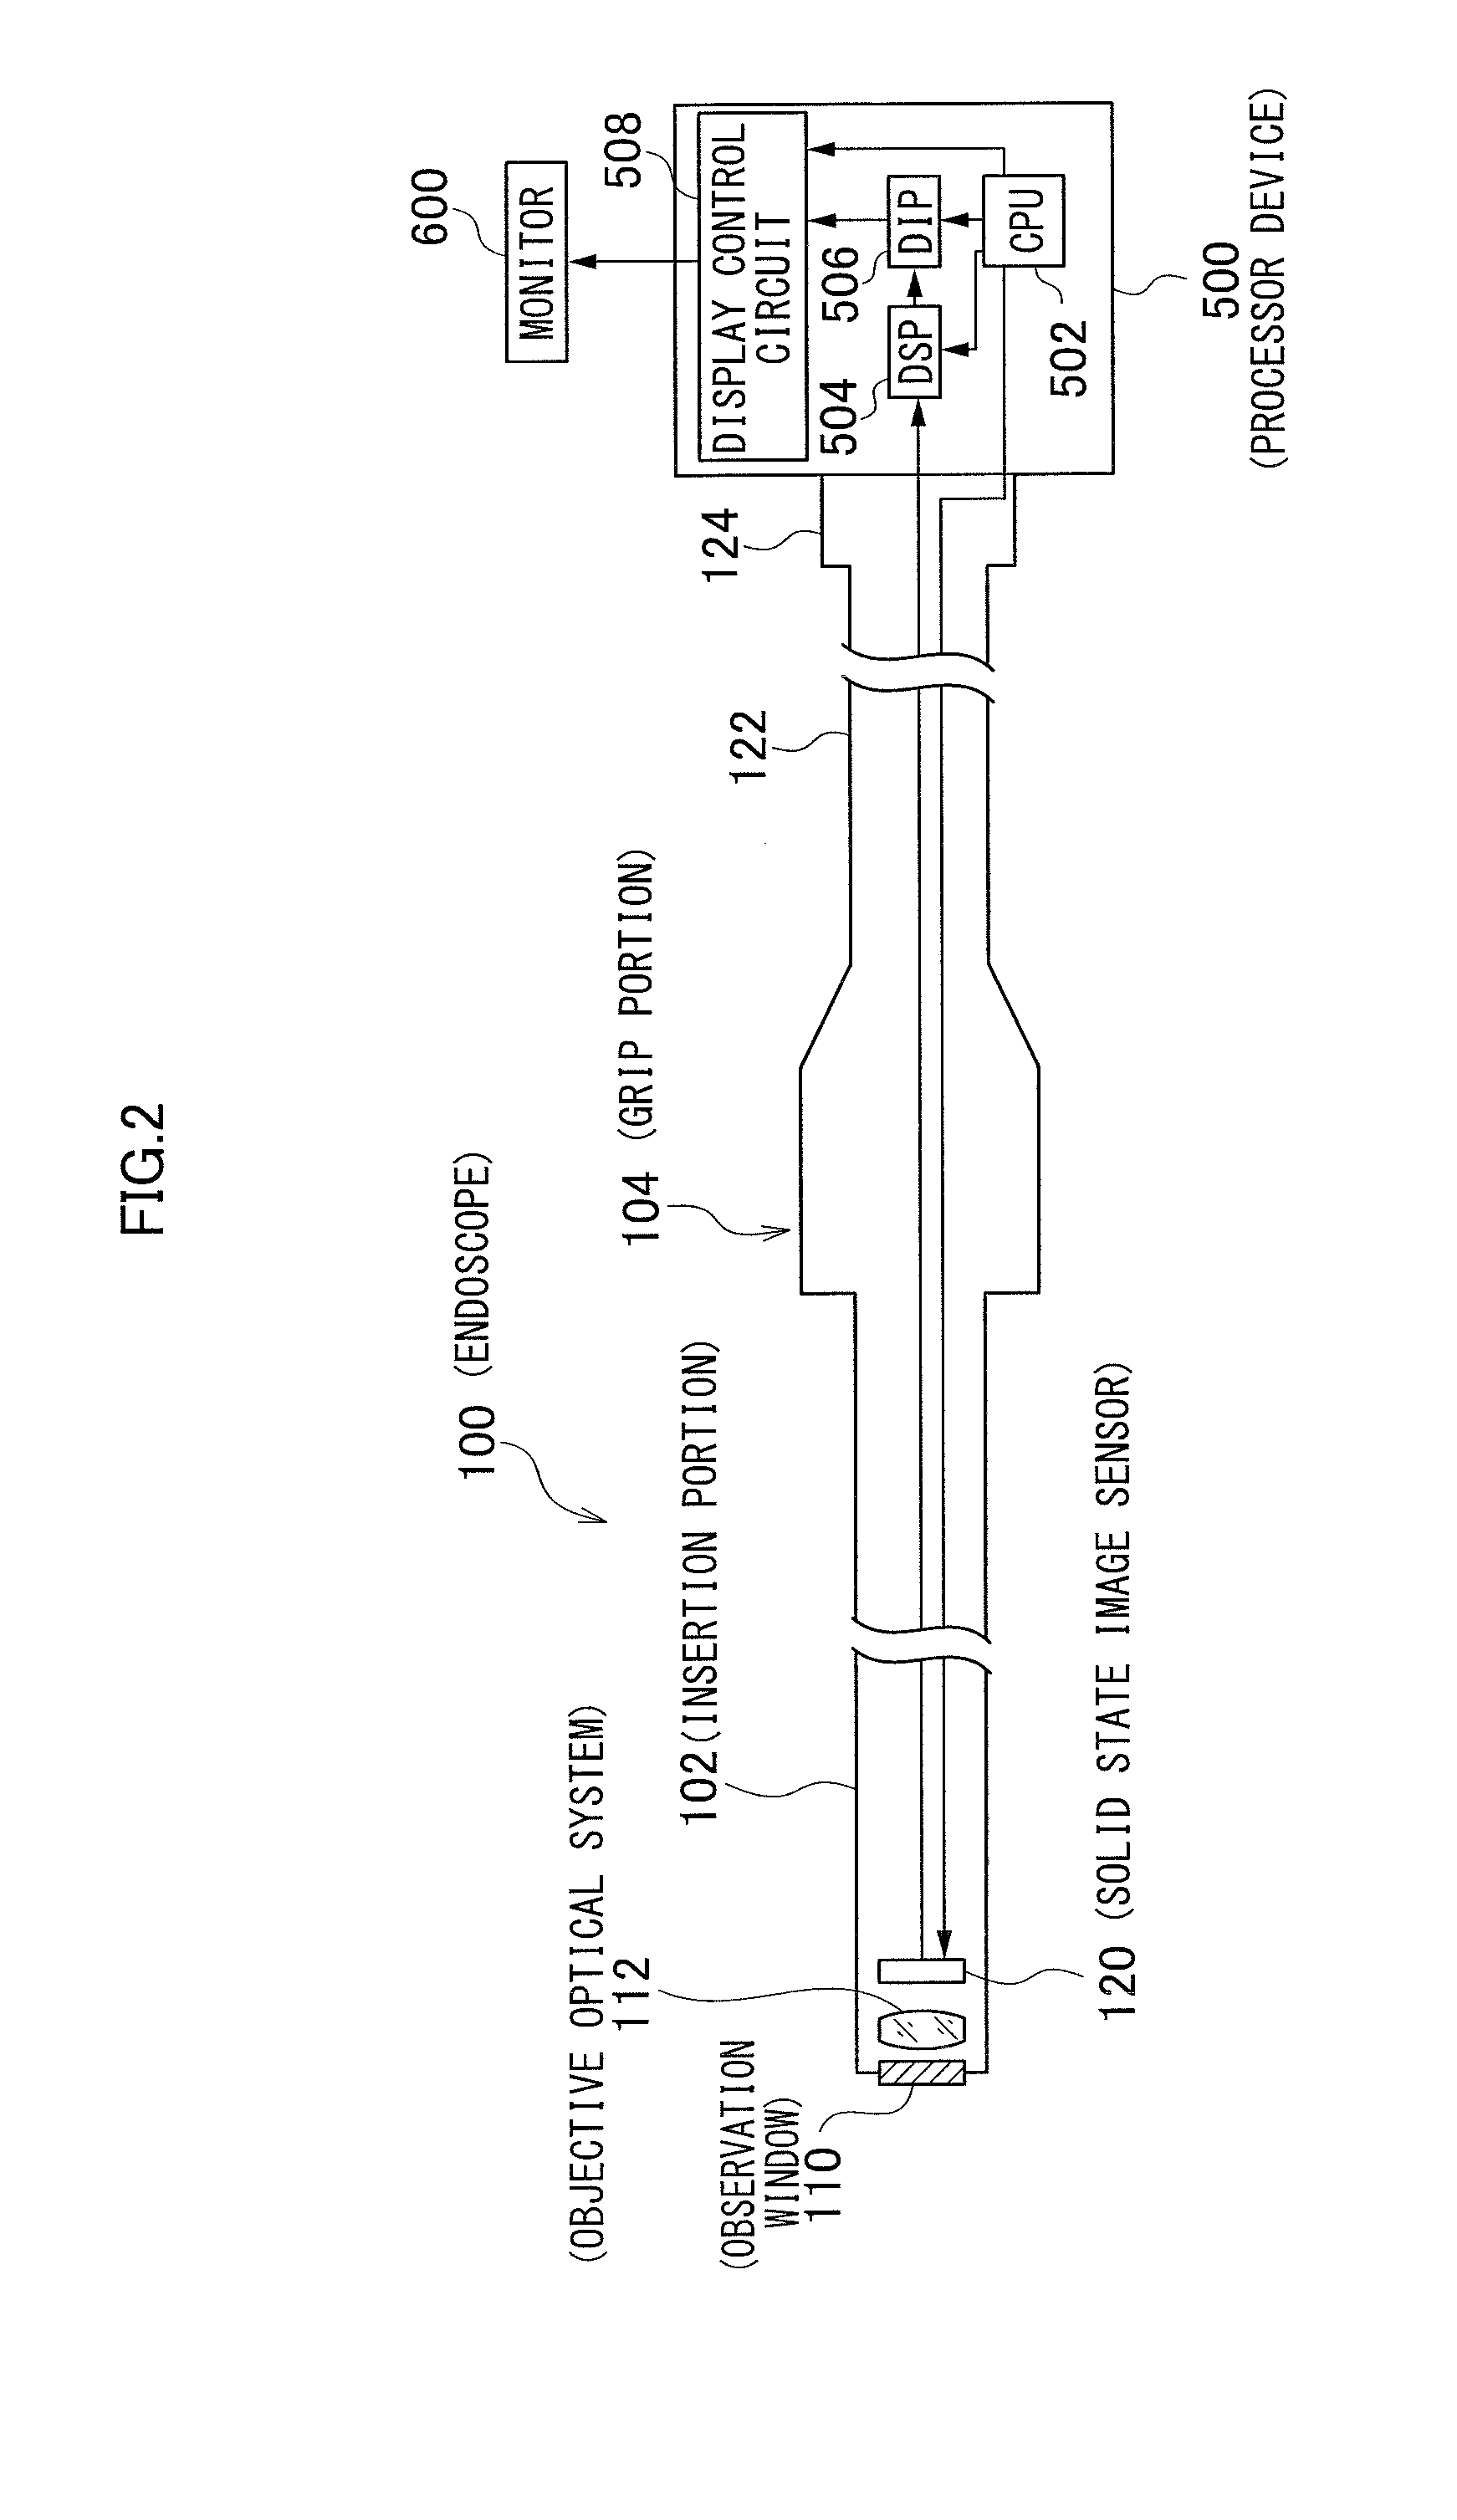 Method of placing medical insertion instruments in body cavity